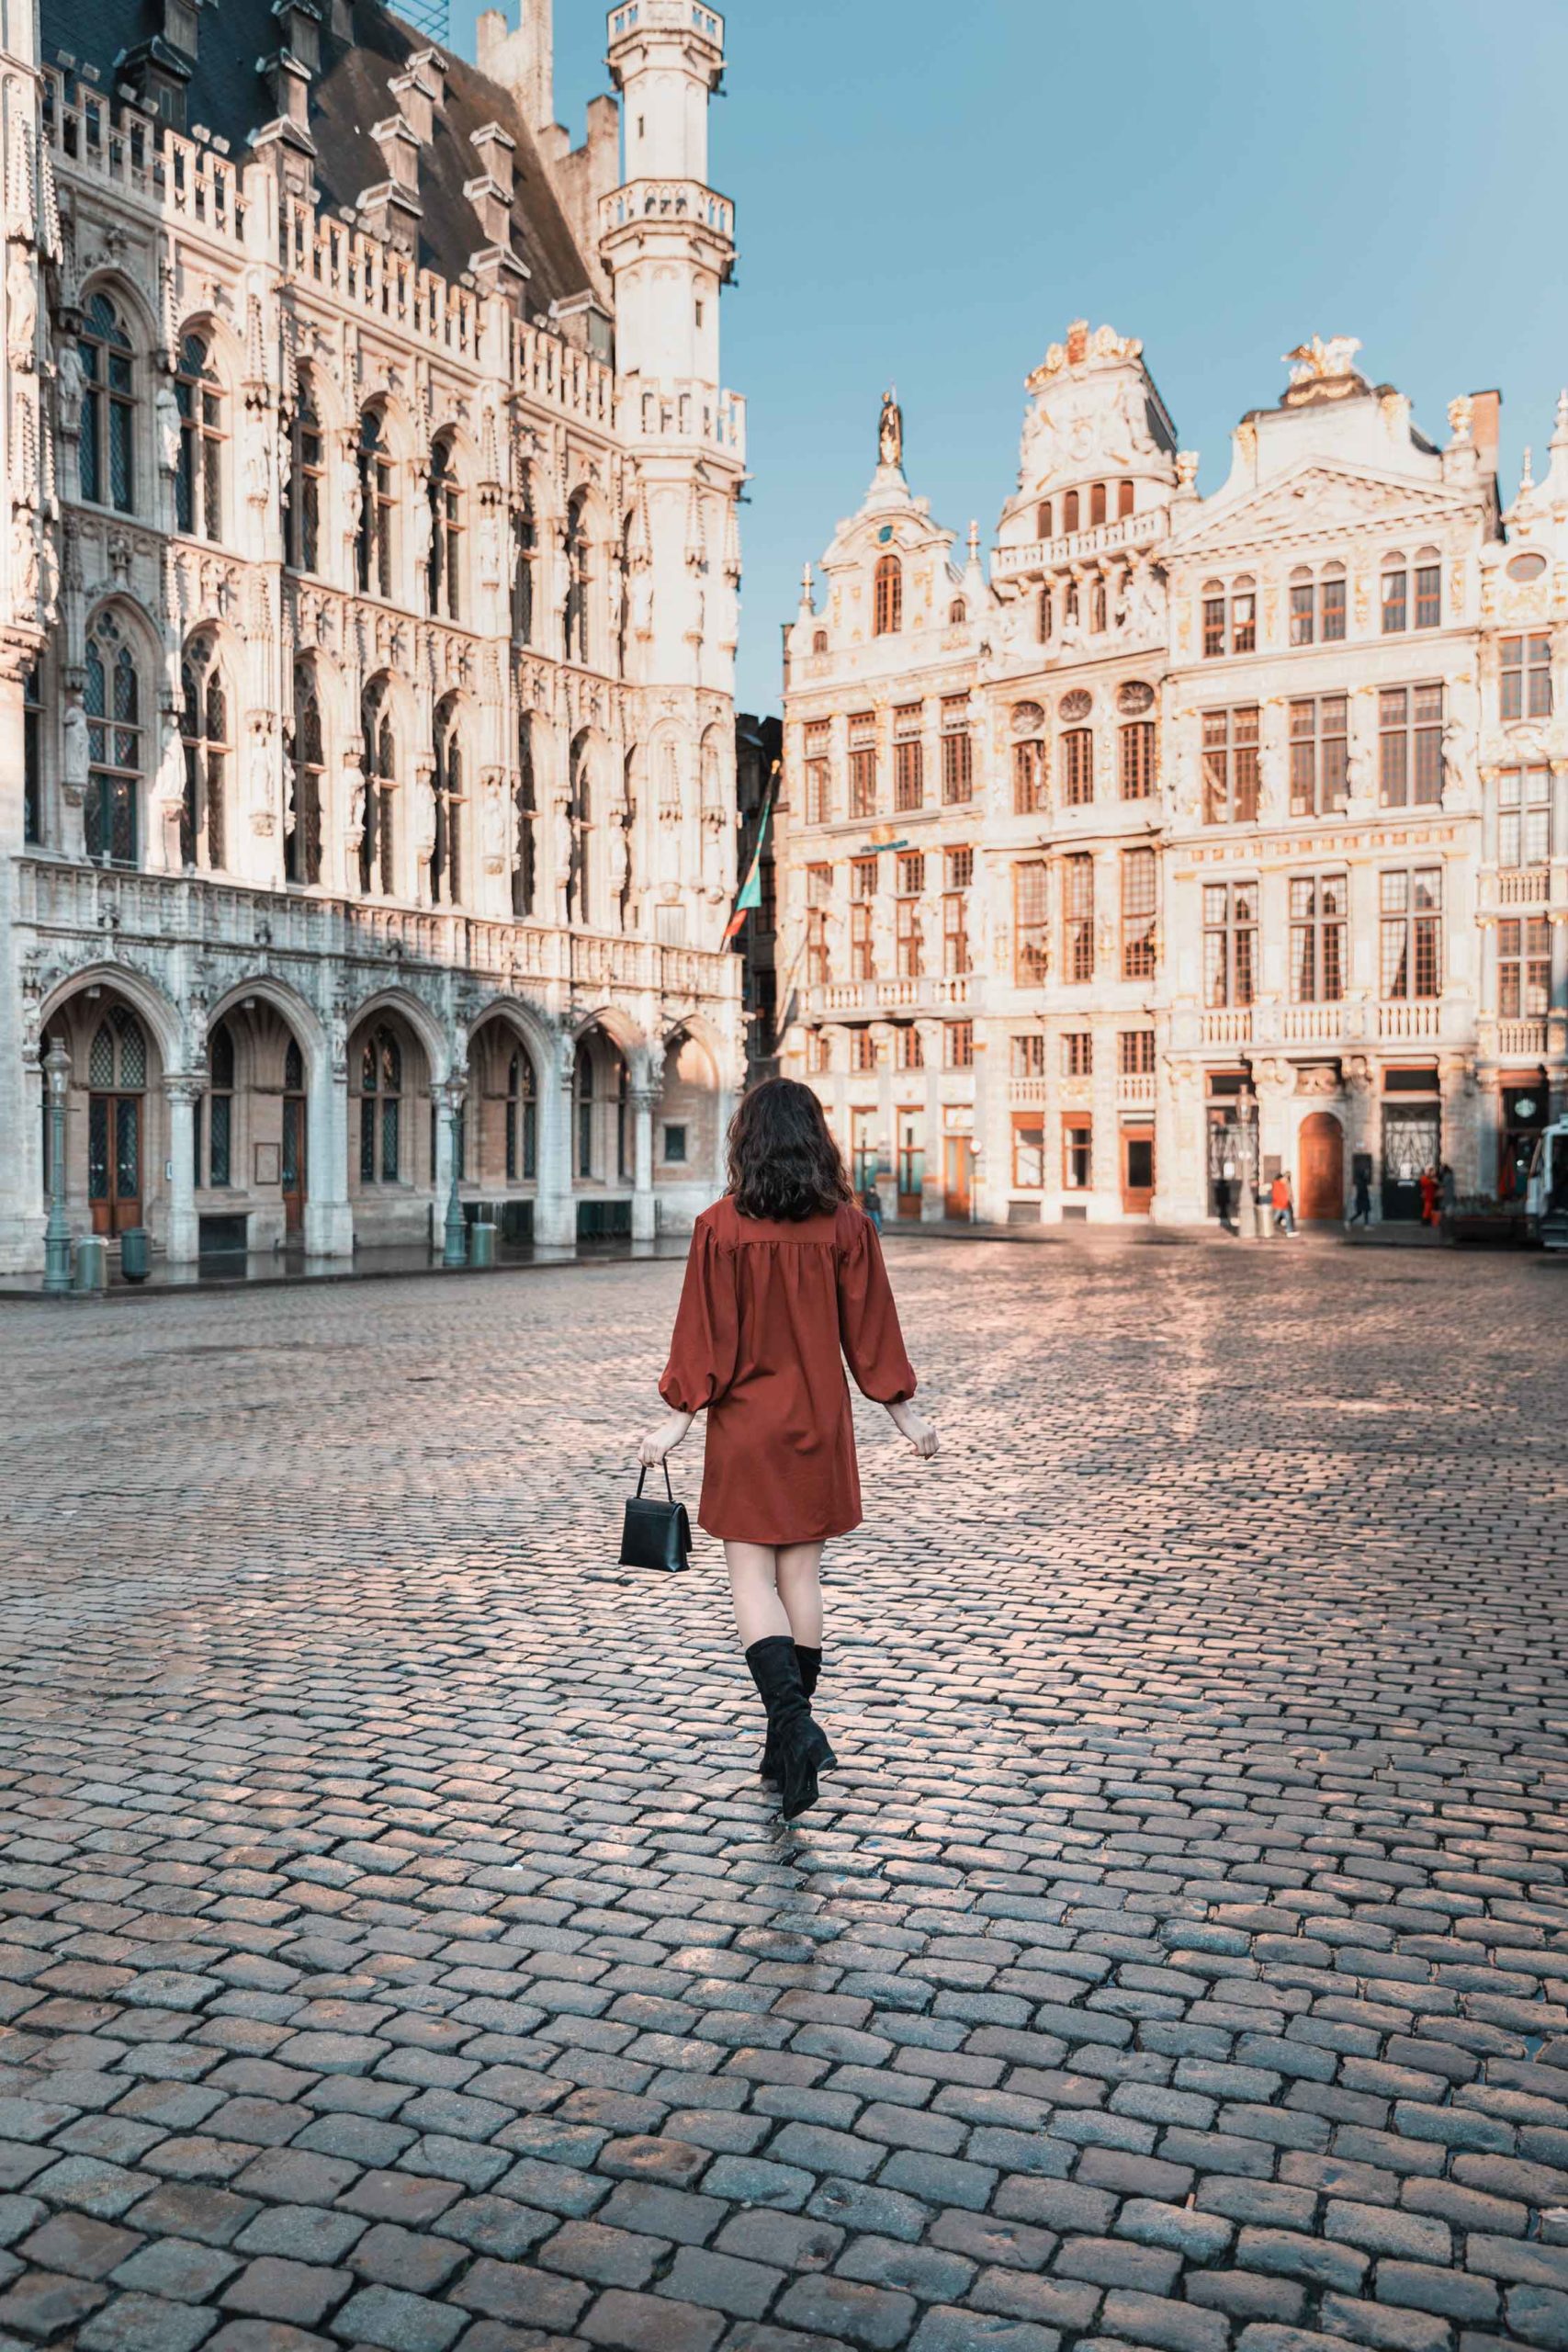 Brussels Travel guide to enjoy it like a local